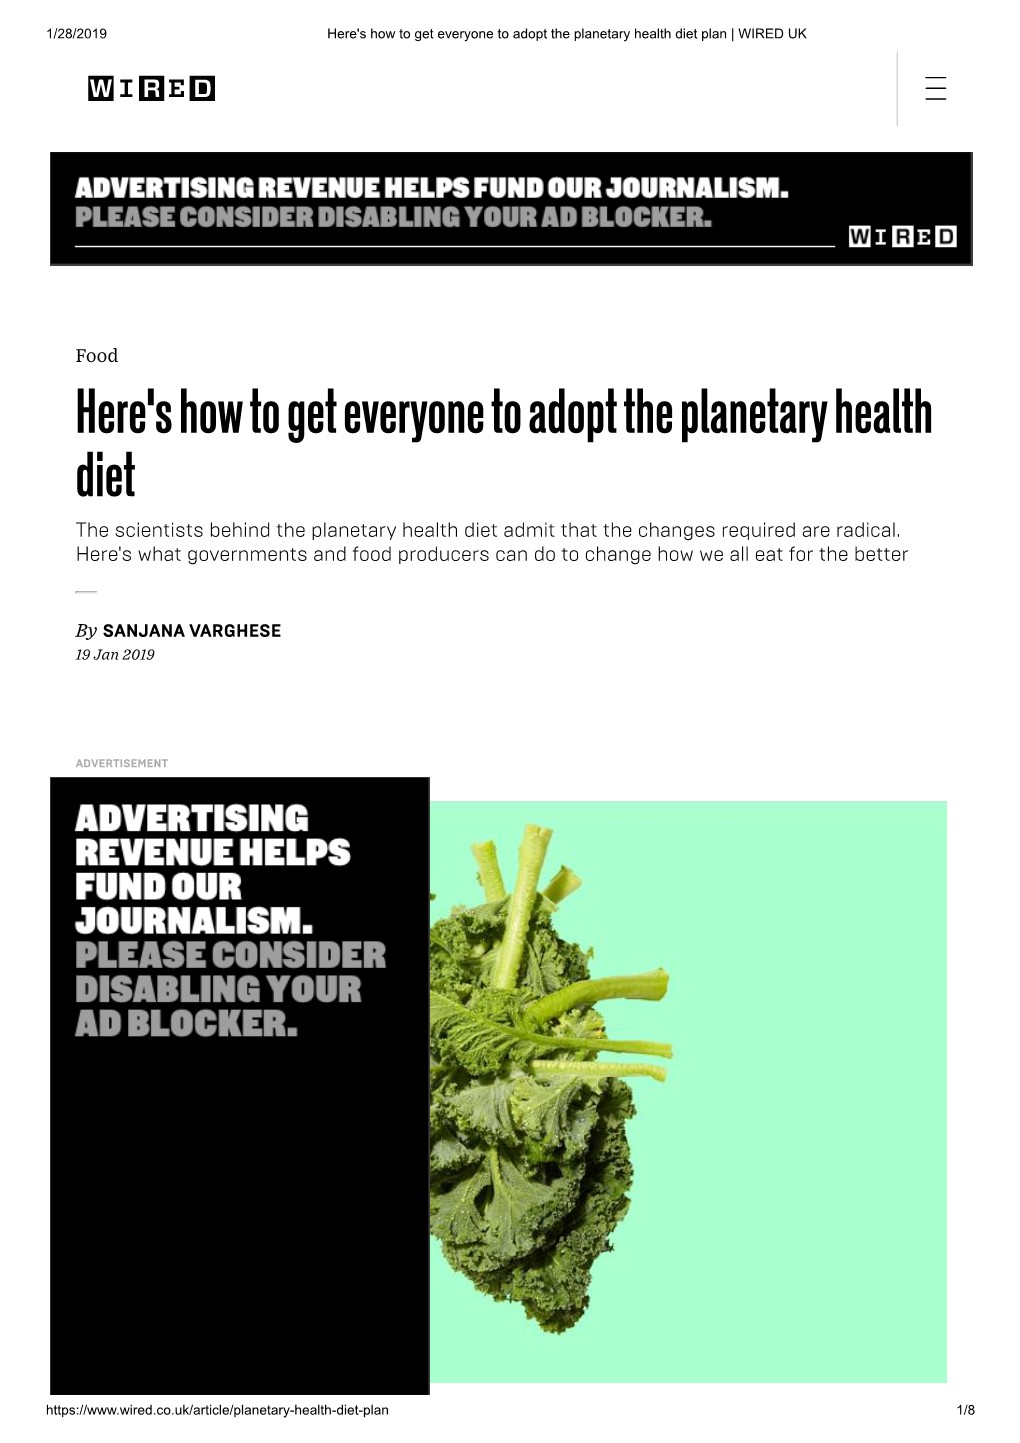 Here's How to Get Everyone to Adopt the Planetary Health Diet Plan | WIRED UK